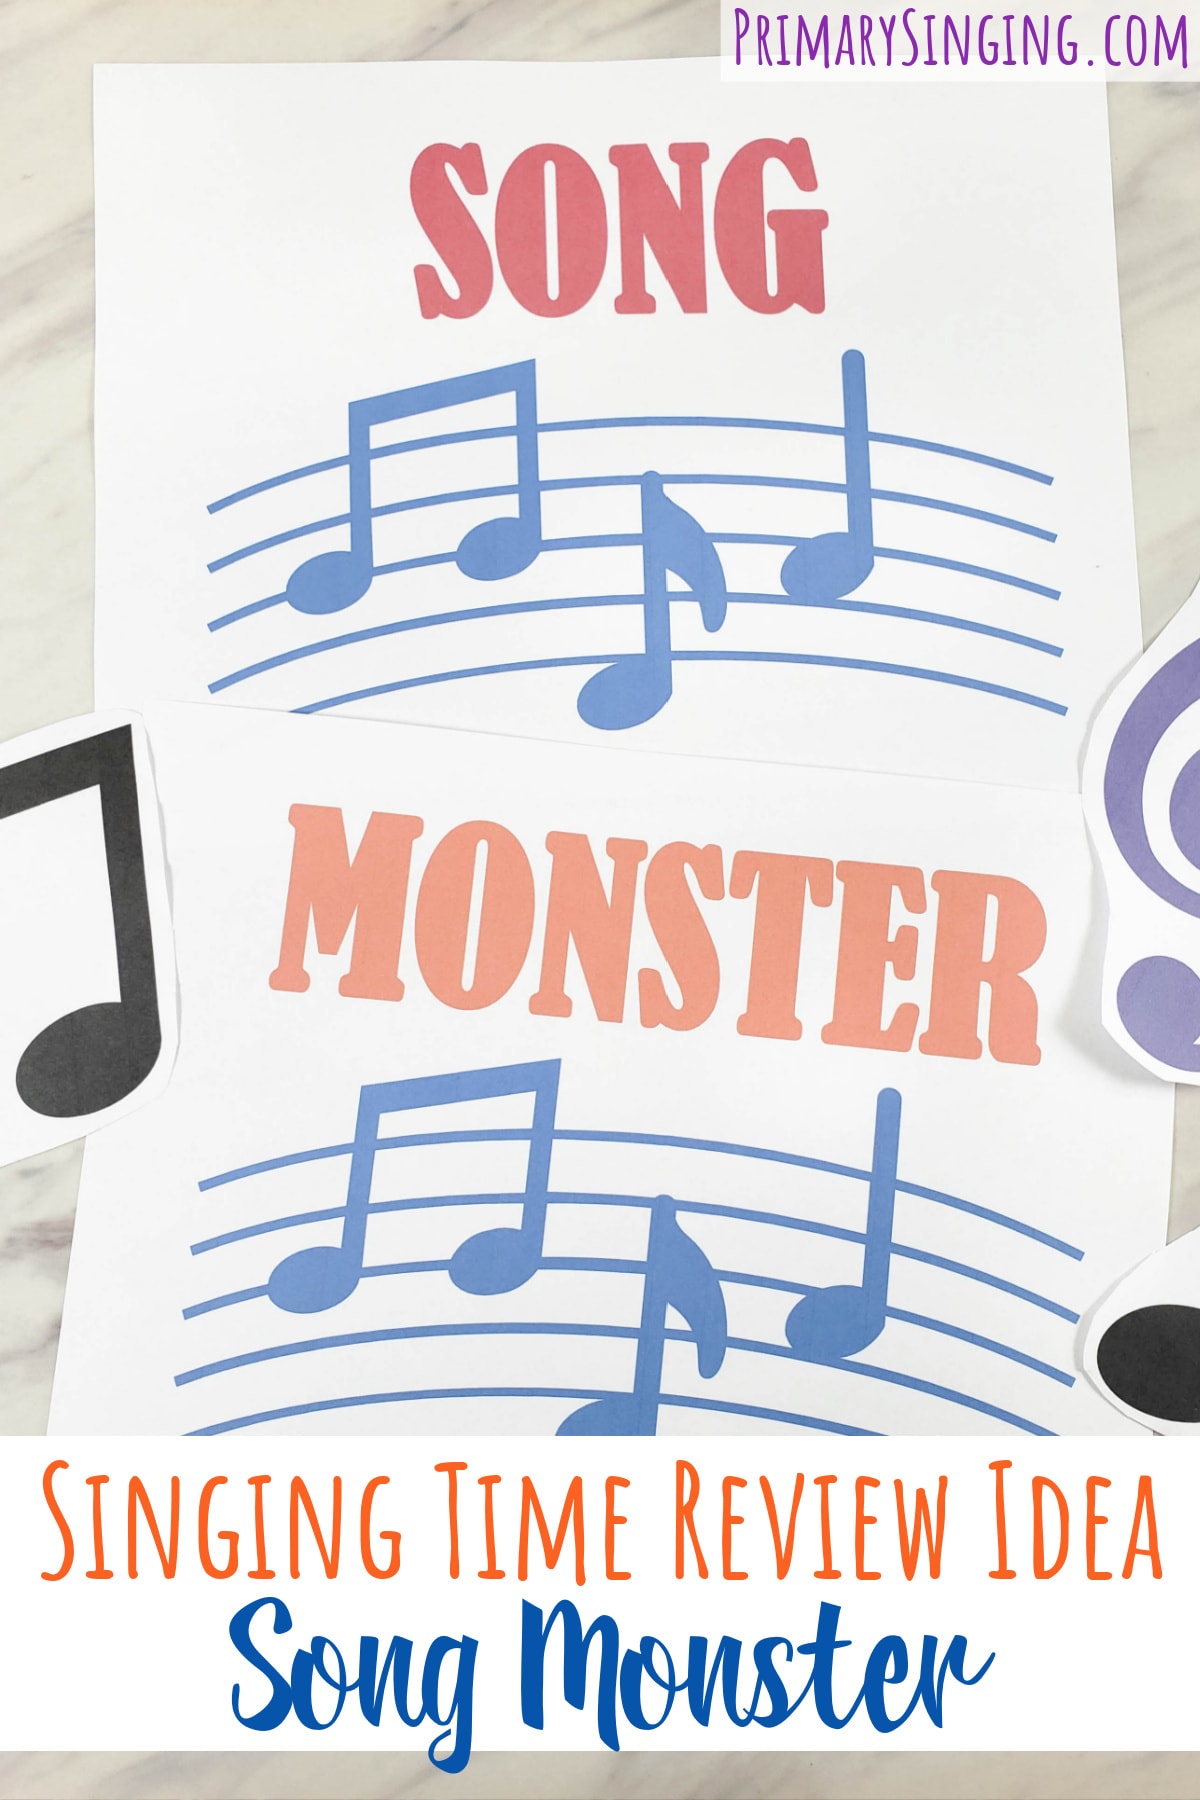 Singing Time Song Monster review game idea for LDS Primary music leaders